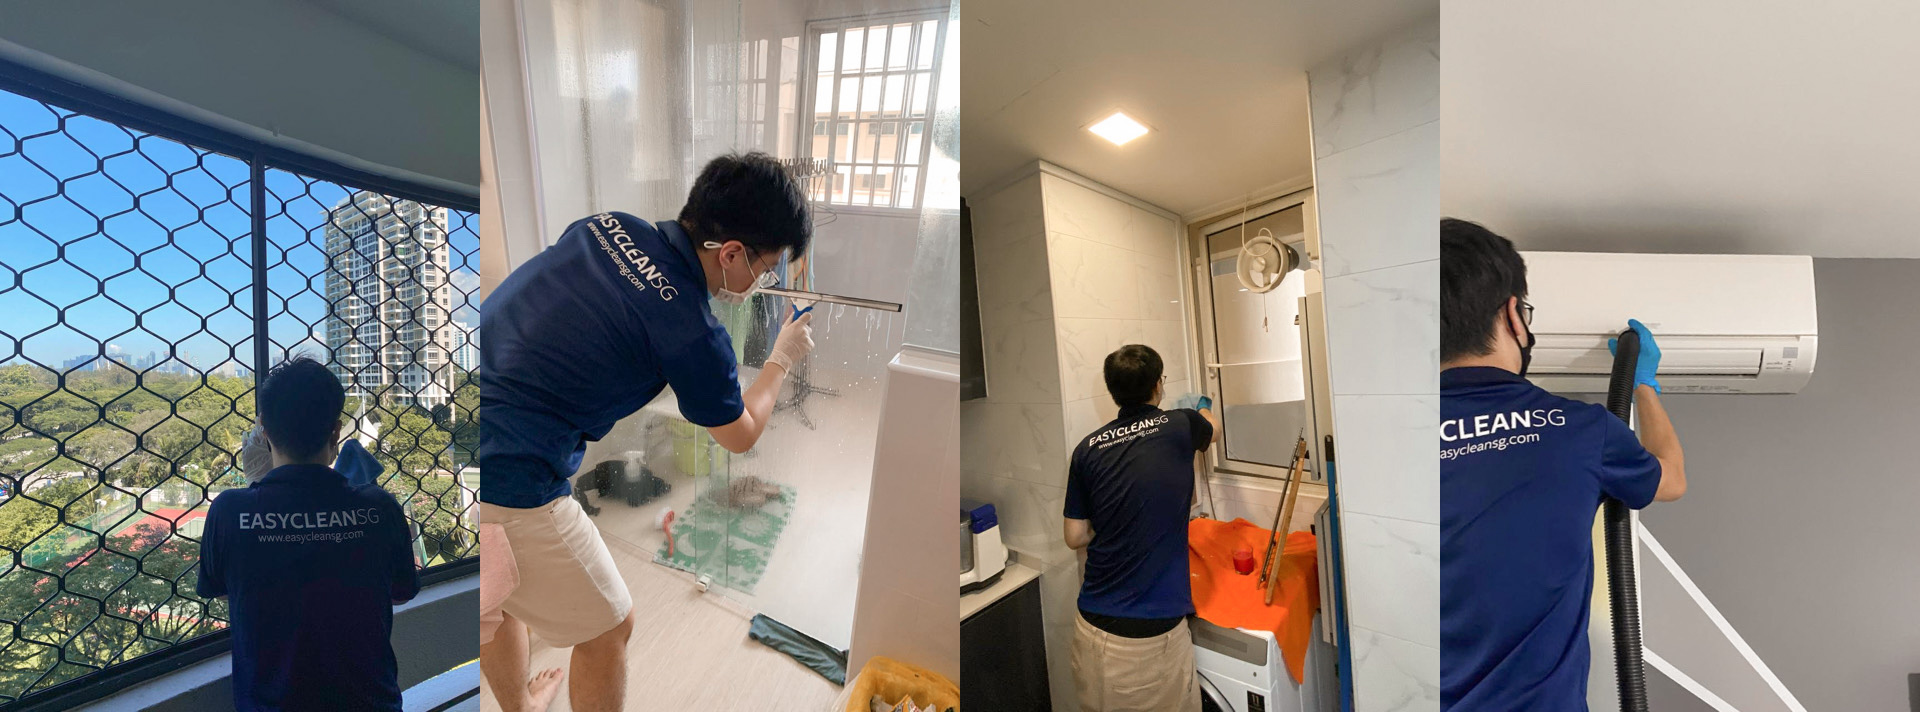 https://www.easycleansg.com/pages/residential